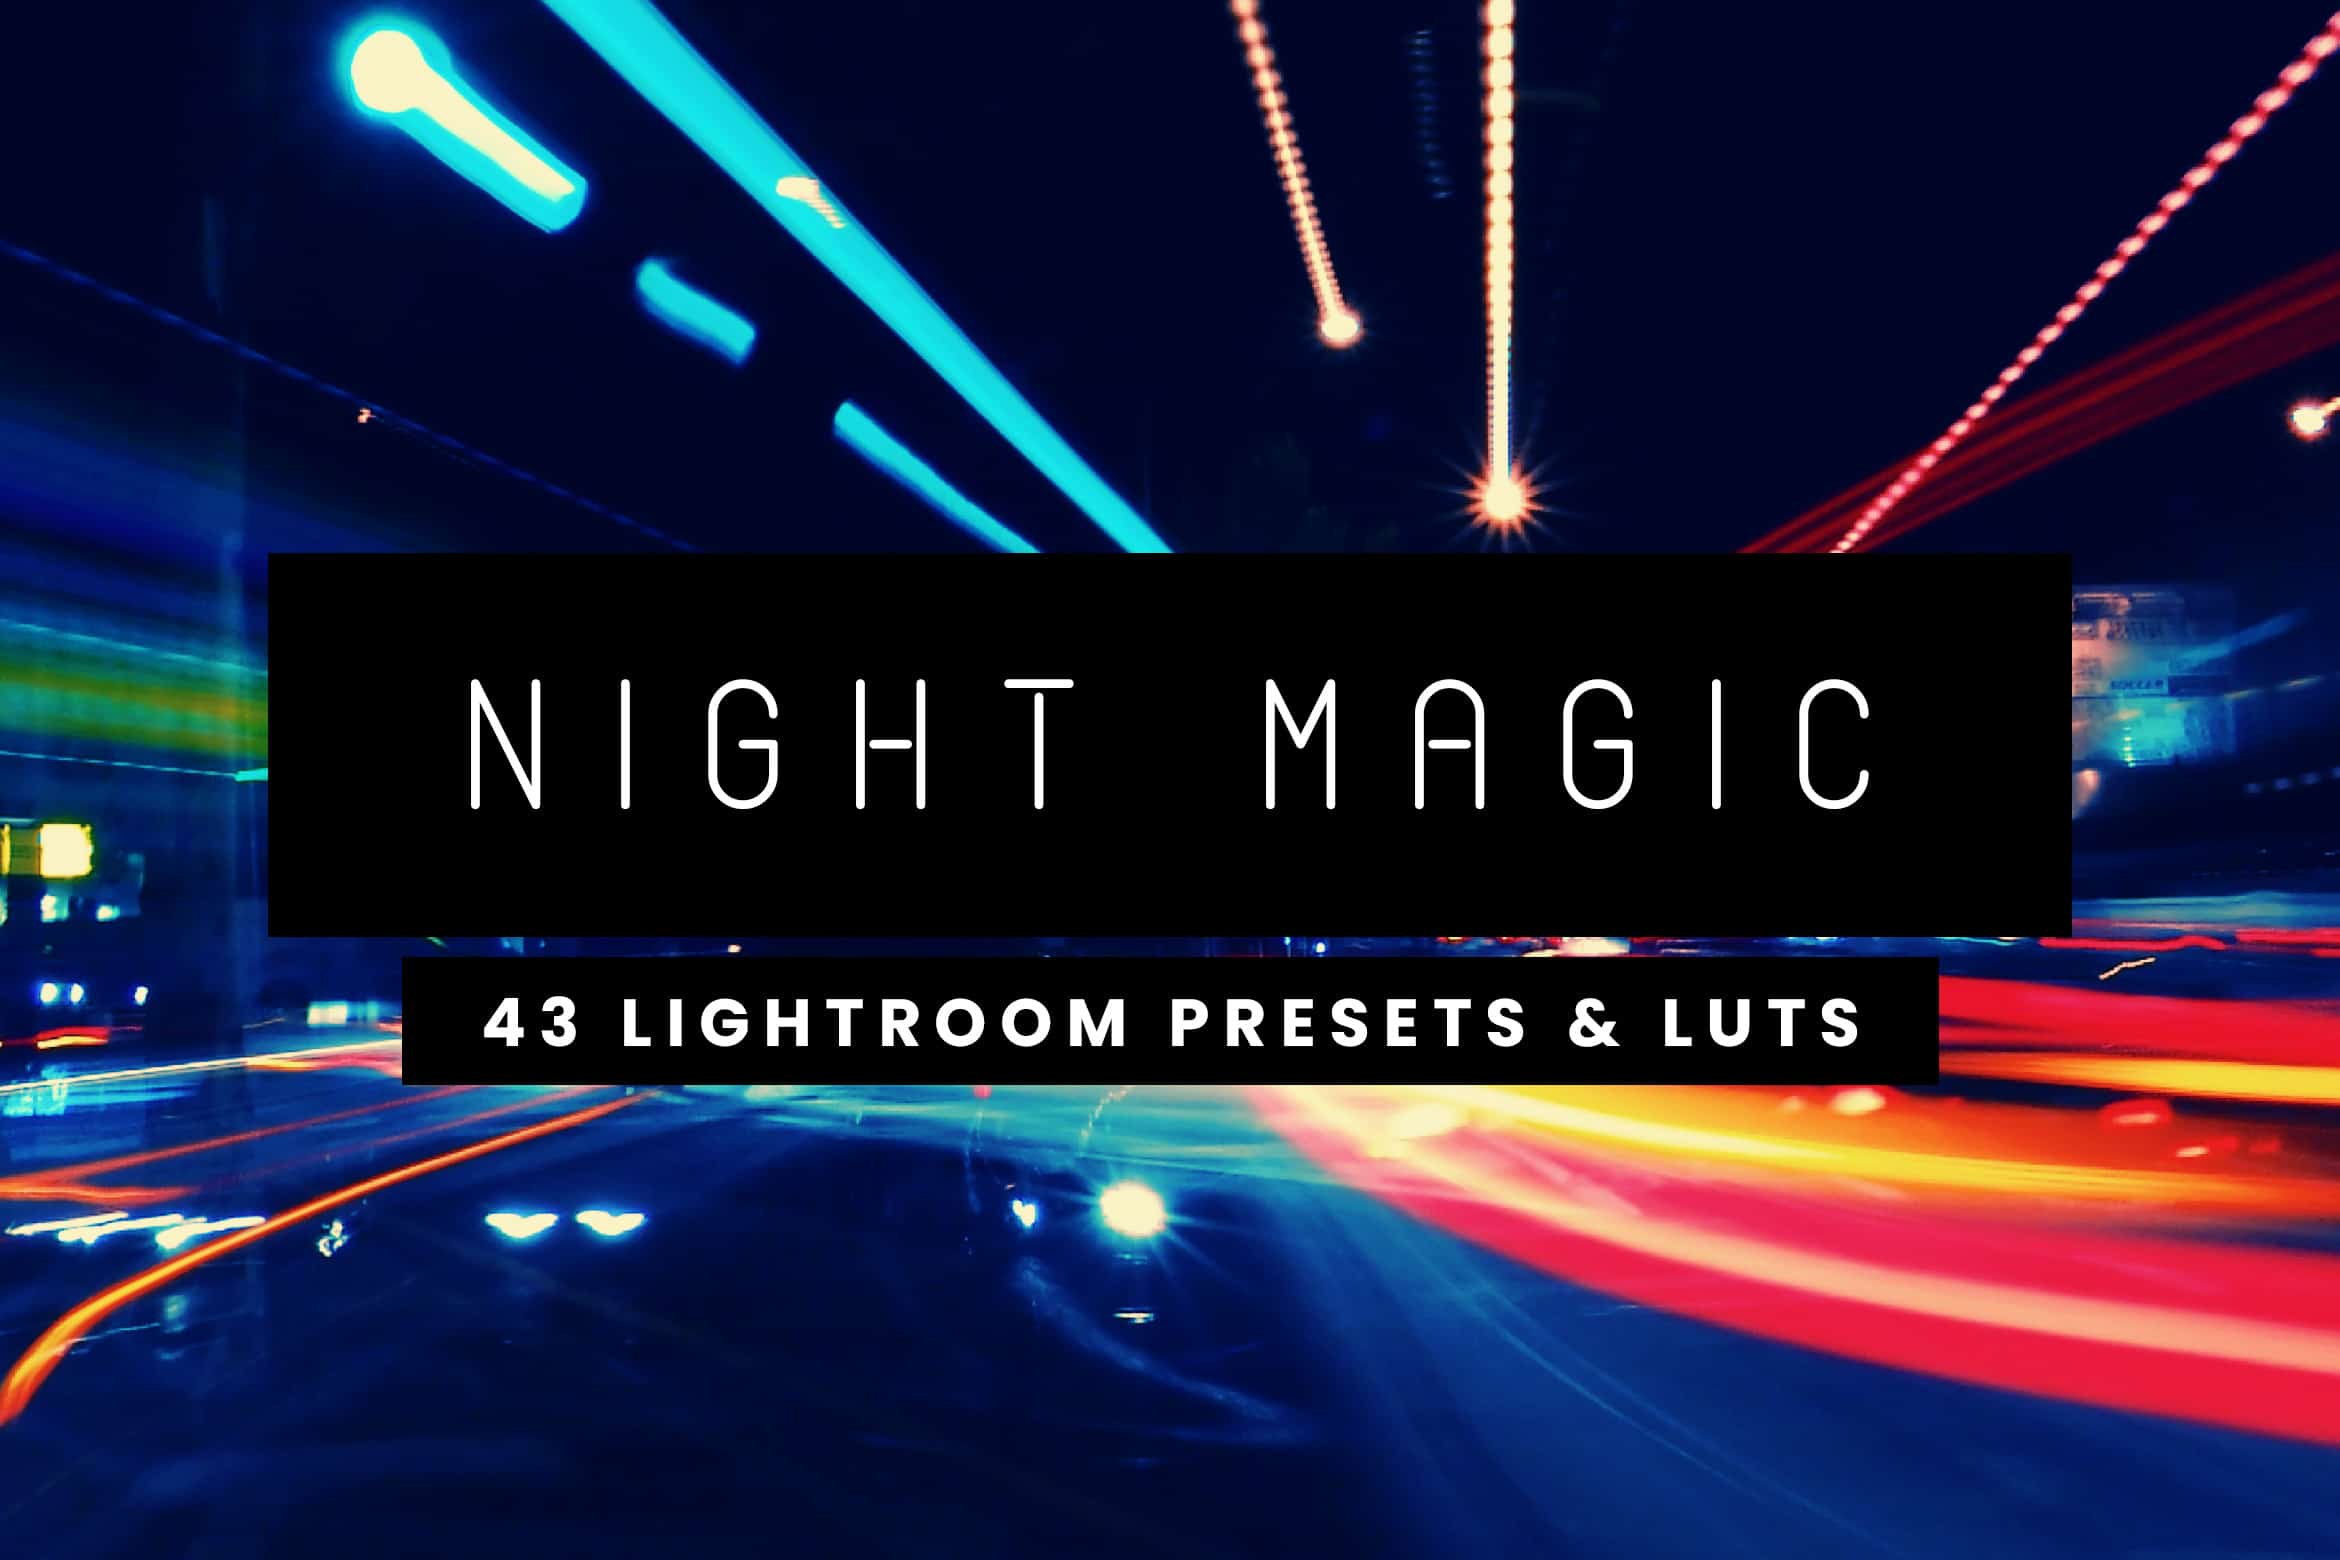 8 Free Lightroom Presets and LUTs for Nightscapes